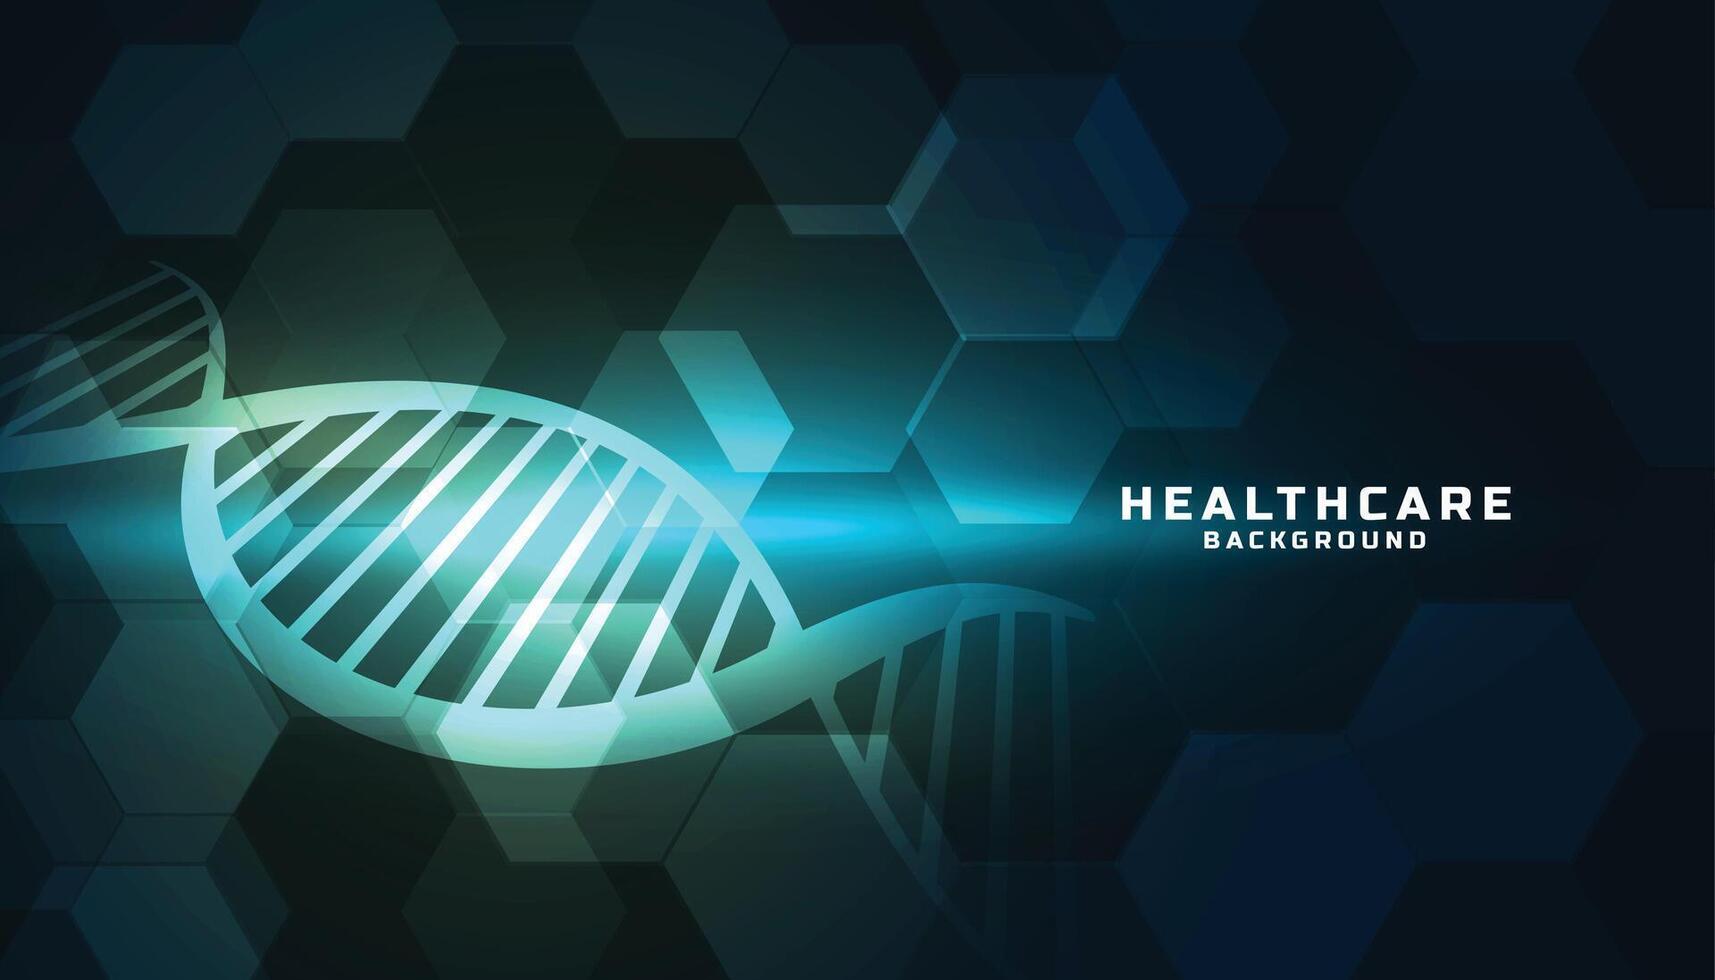 medical dna background with shiny hexagonal shapes vector